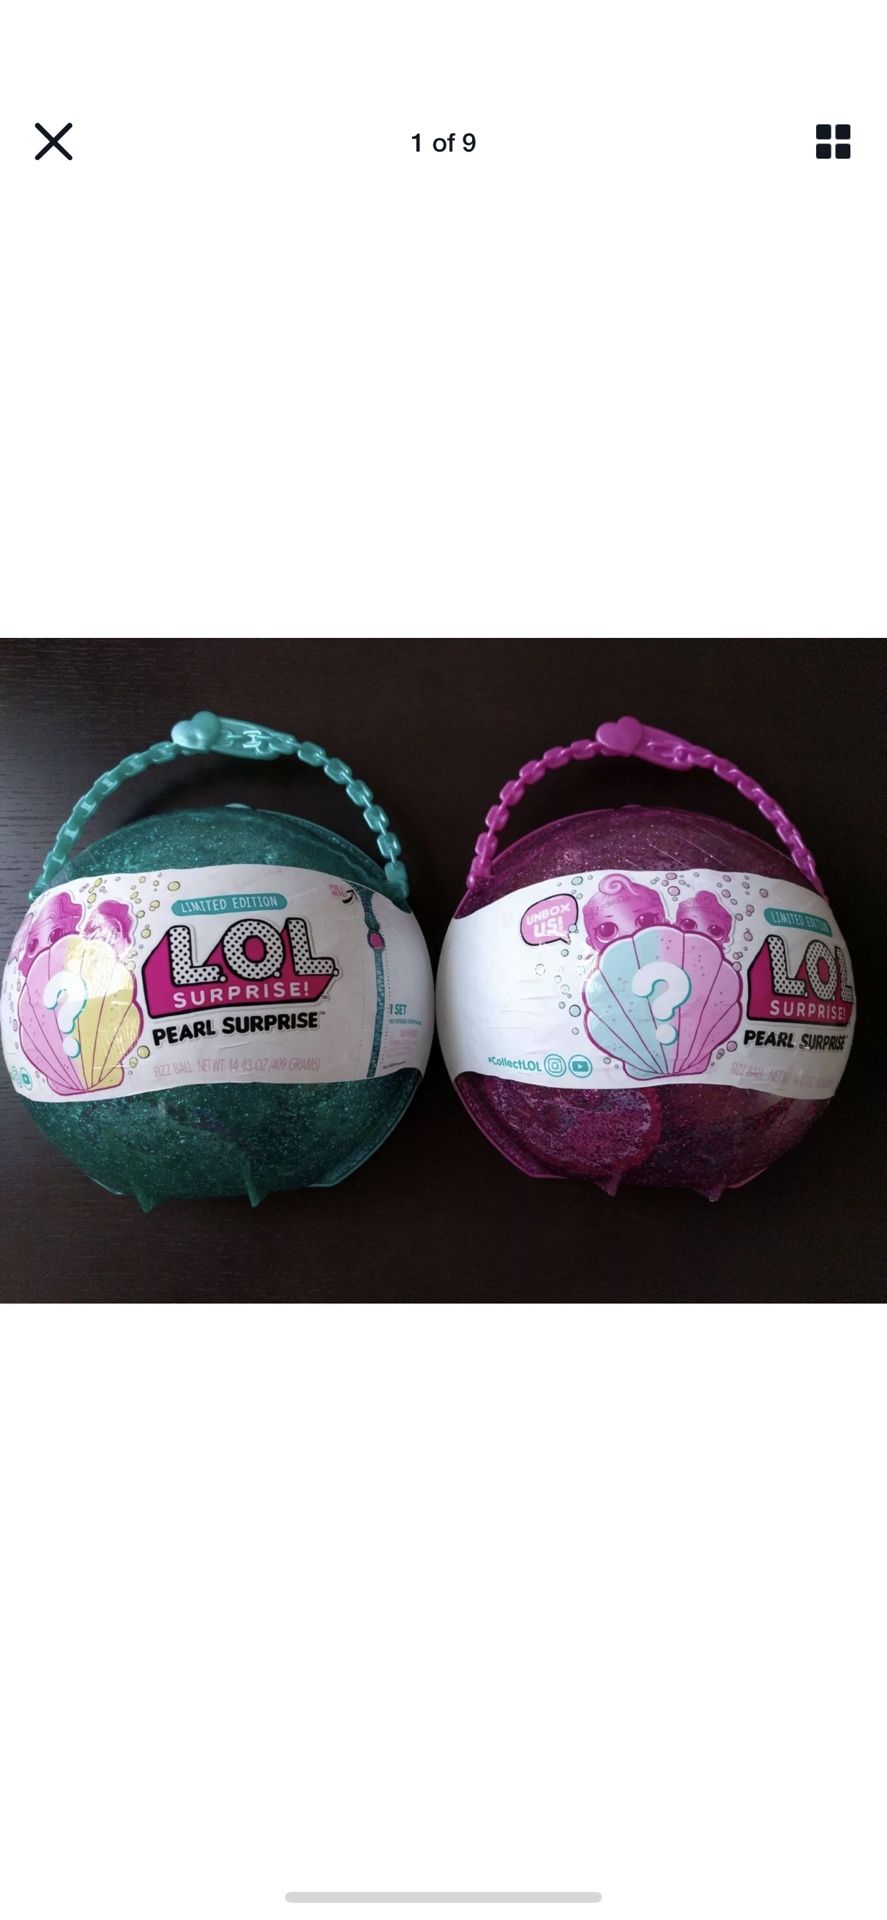 LOL Mermaid PEARL Surprise Limited Edition Set Of 2